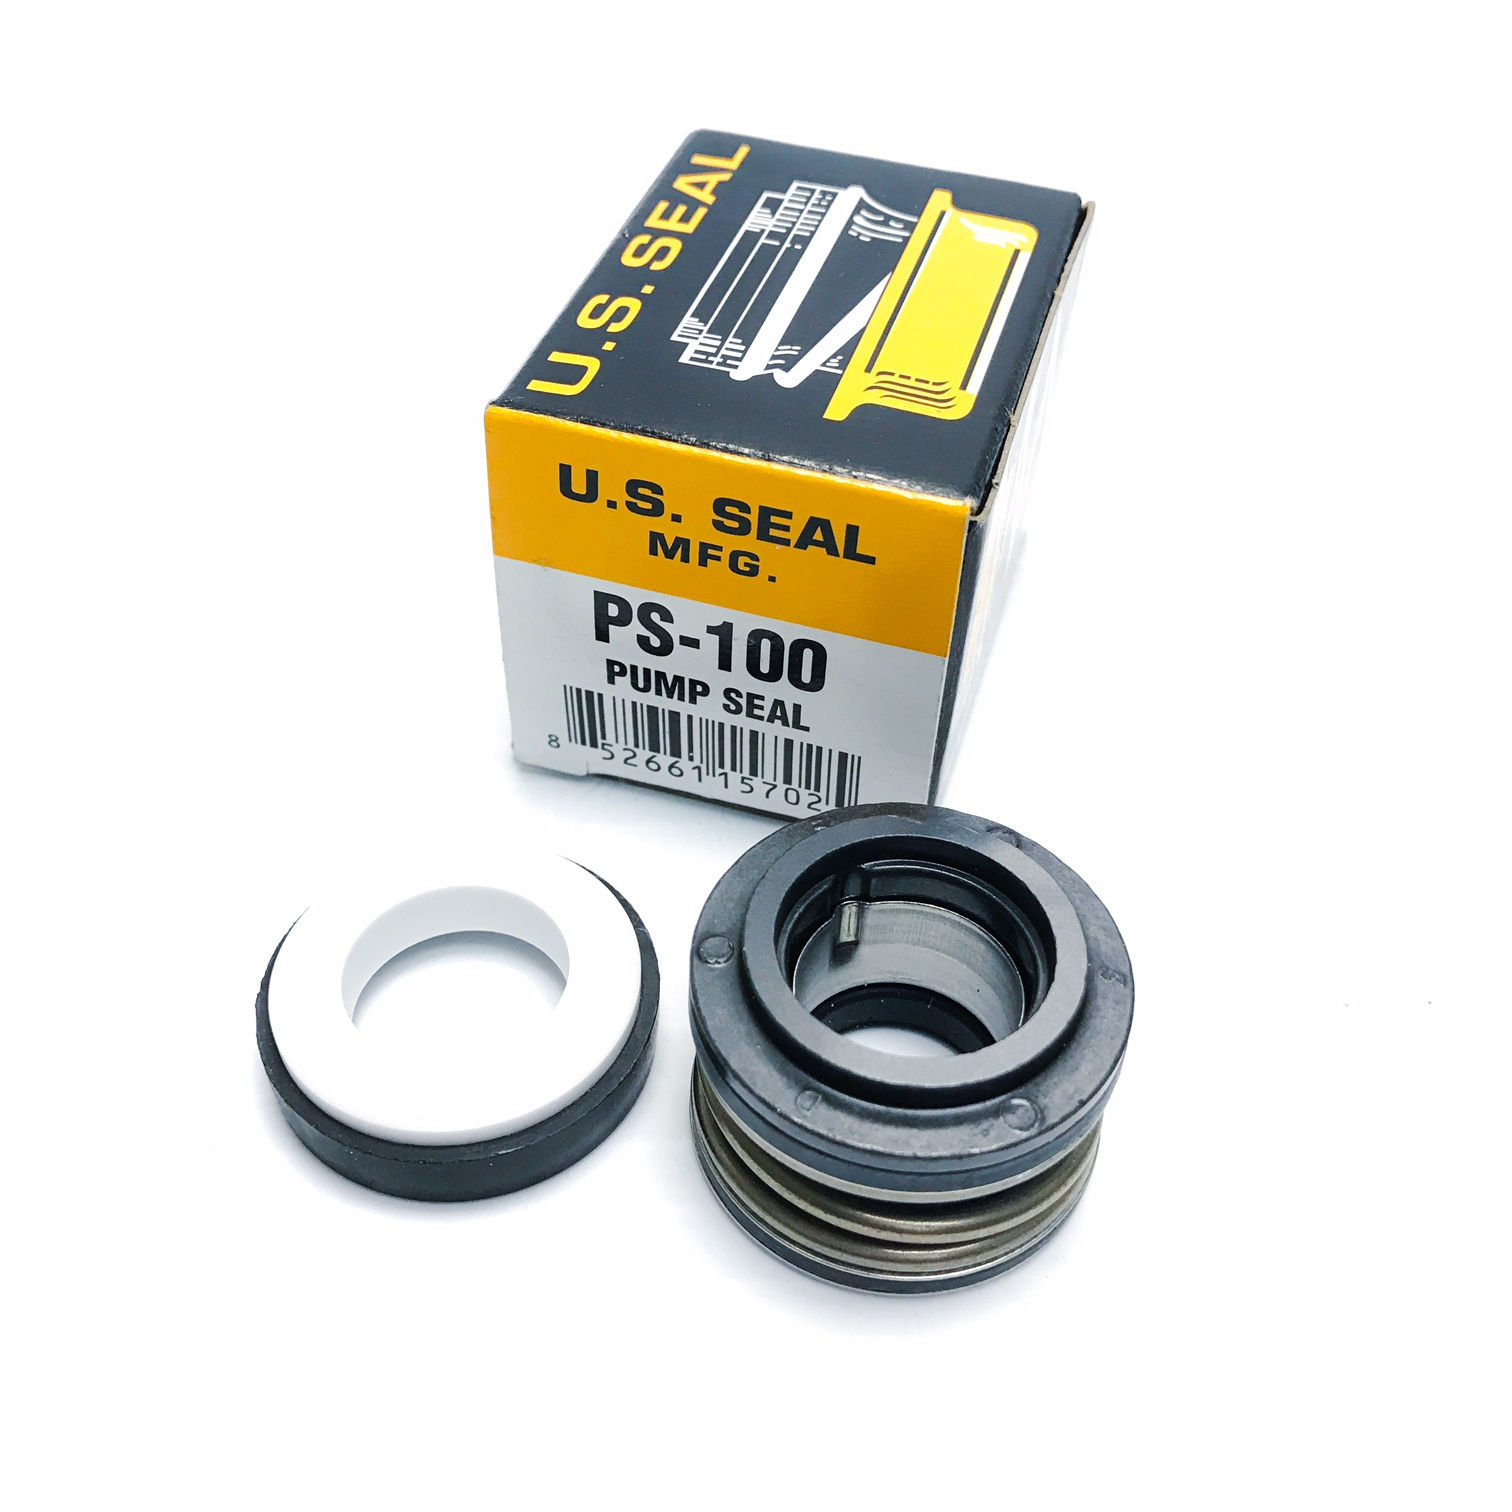 BSP-100 - Mechanical Seal US SEAL:  PS-100 FACTORY NEW! 